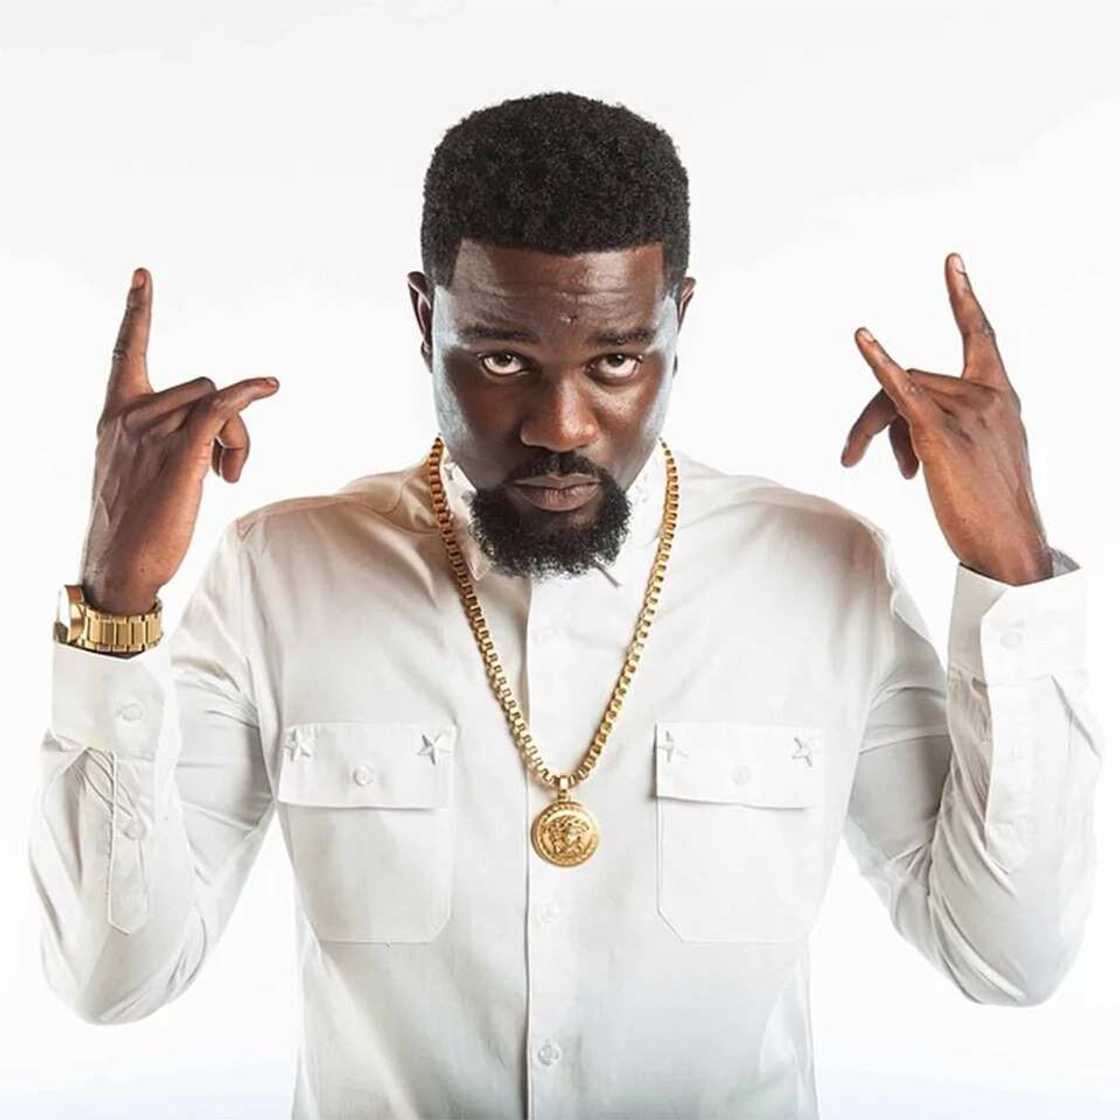 Sarkodie makes Forbes top 10 richest musicians in Africa